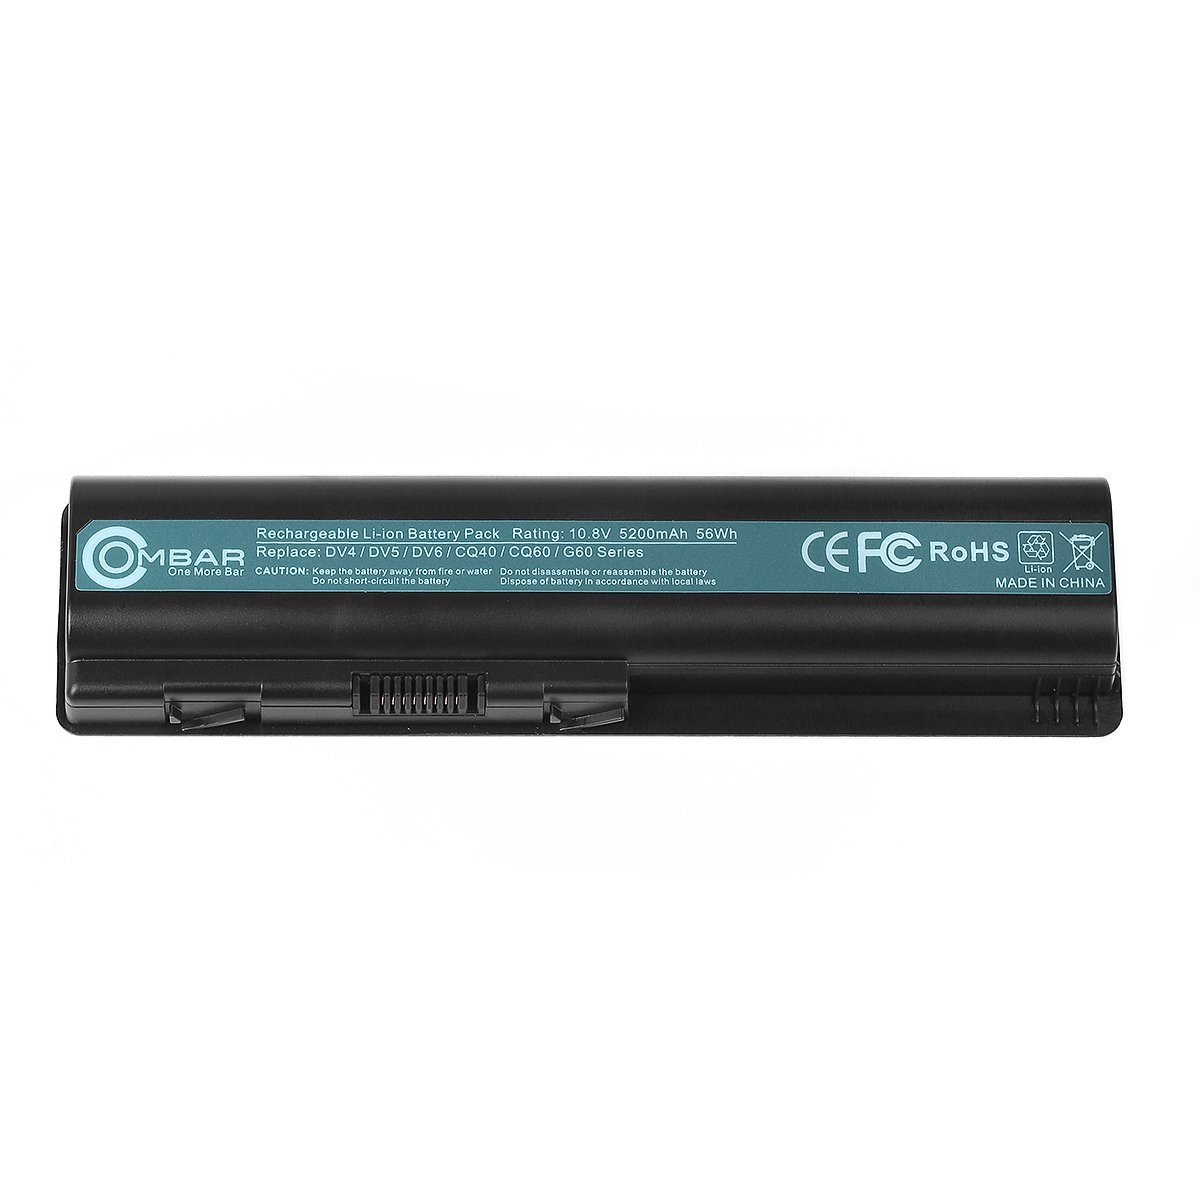 Great Replacement laptop battery